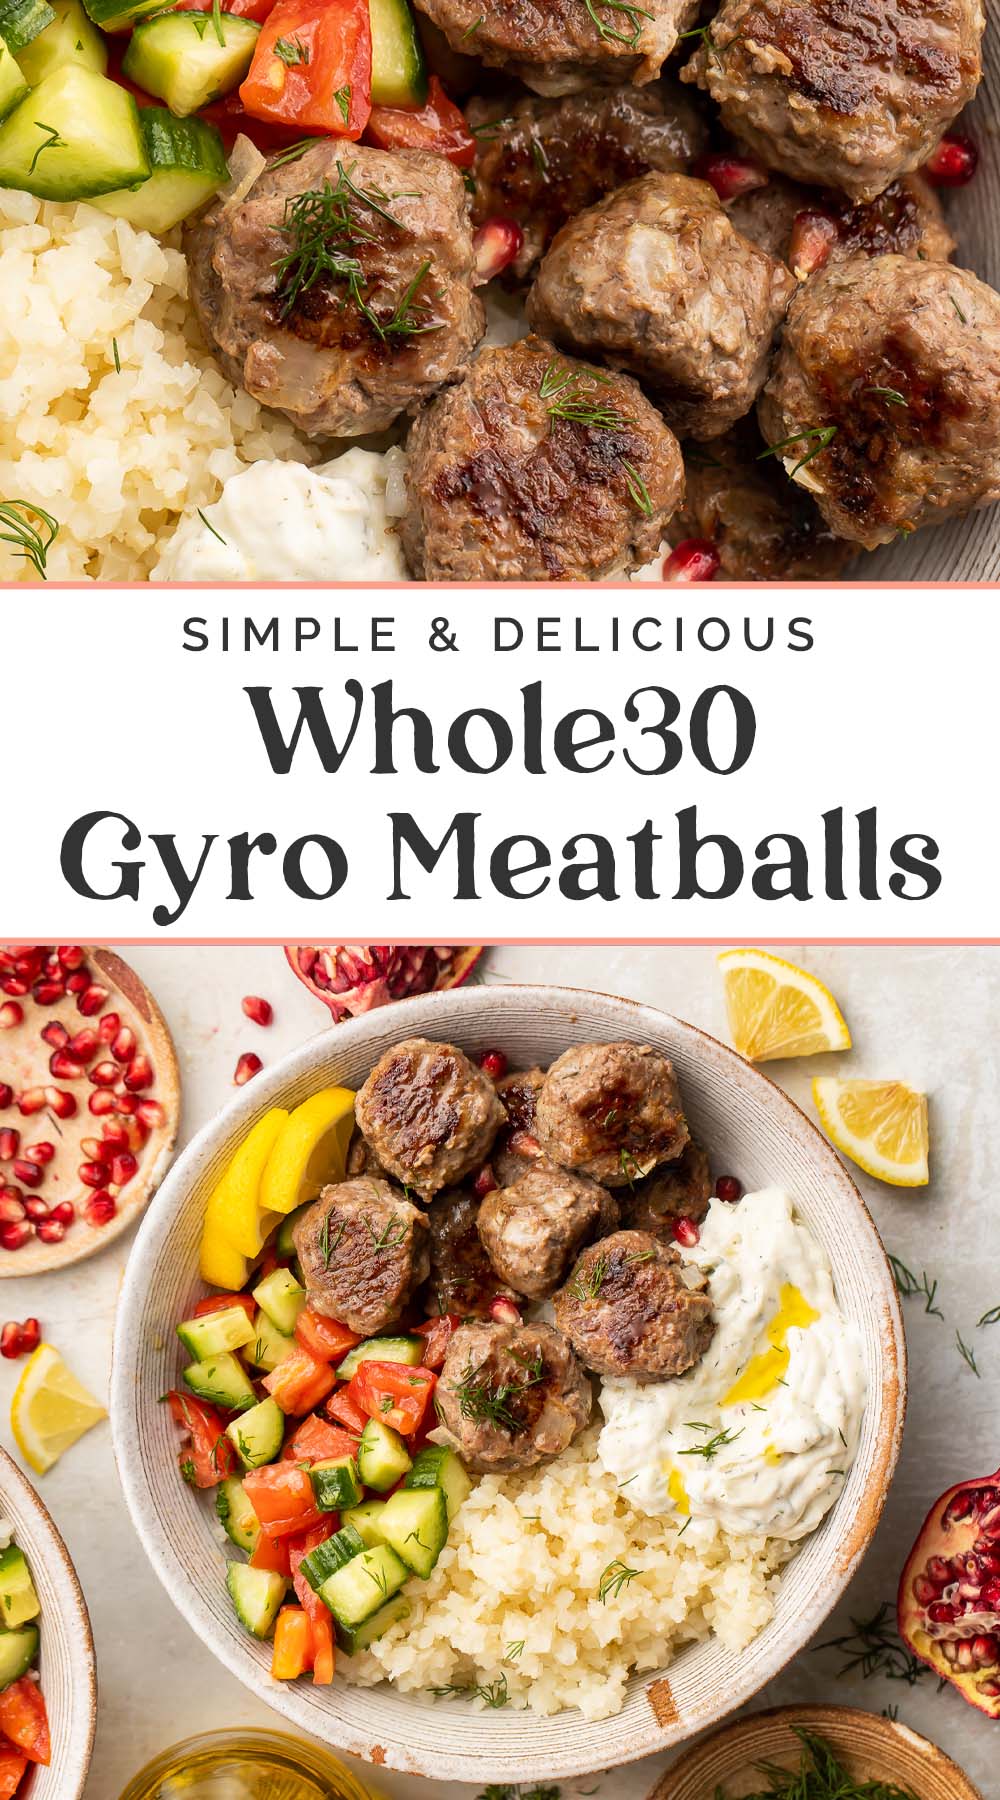 Pin graphic for Whole30 gyro meatballs.